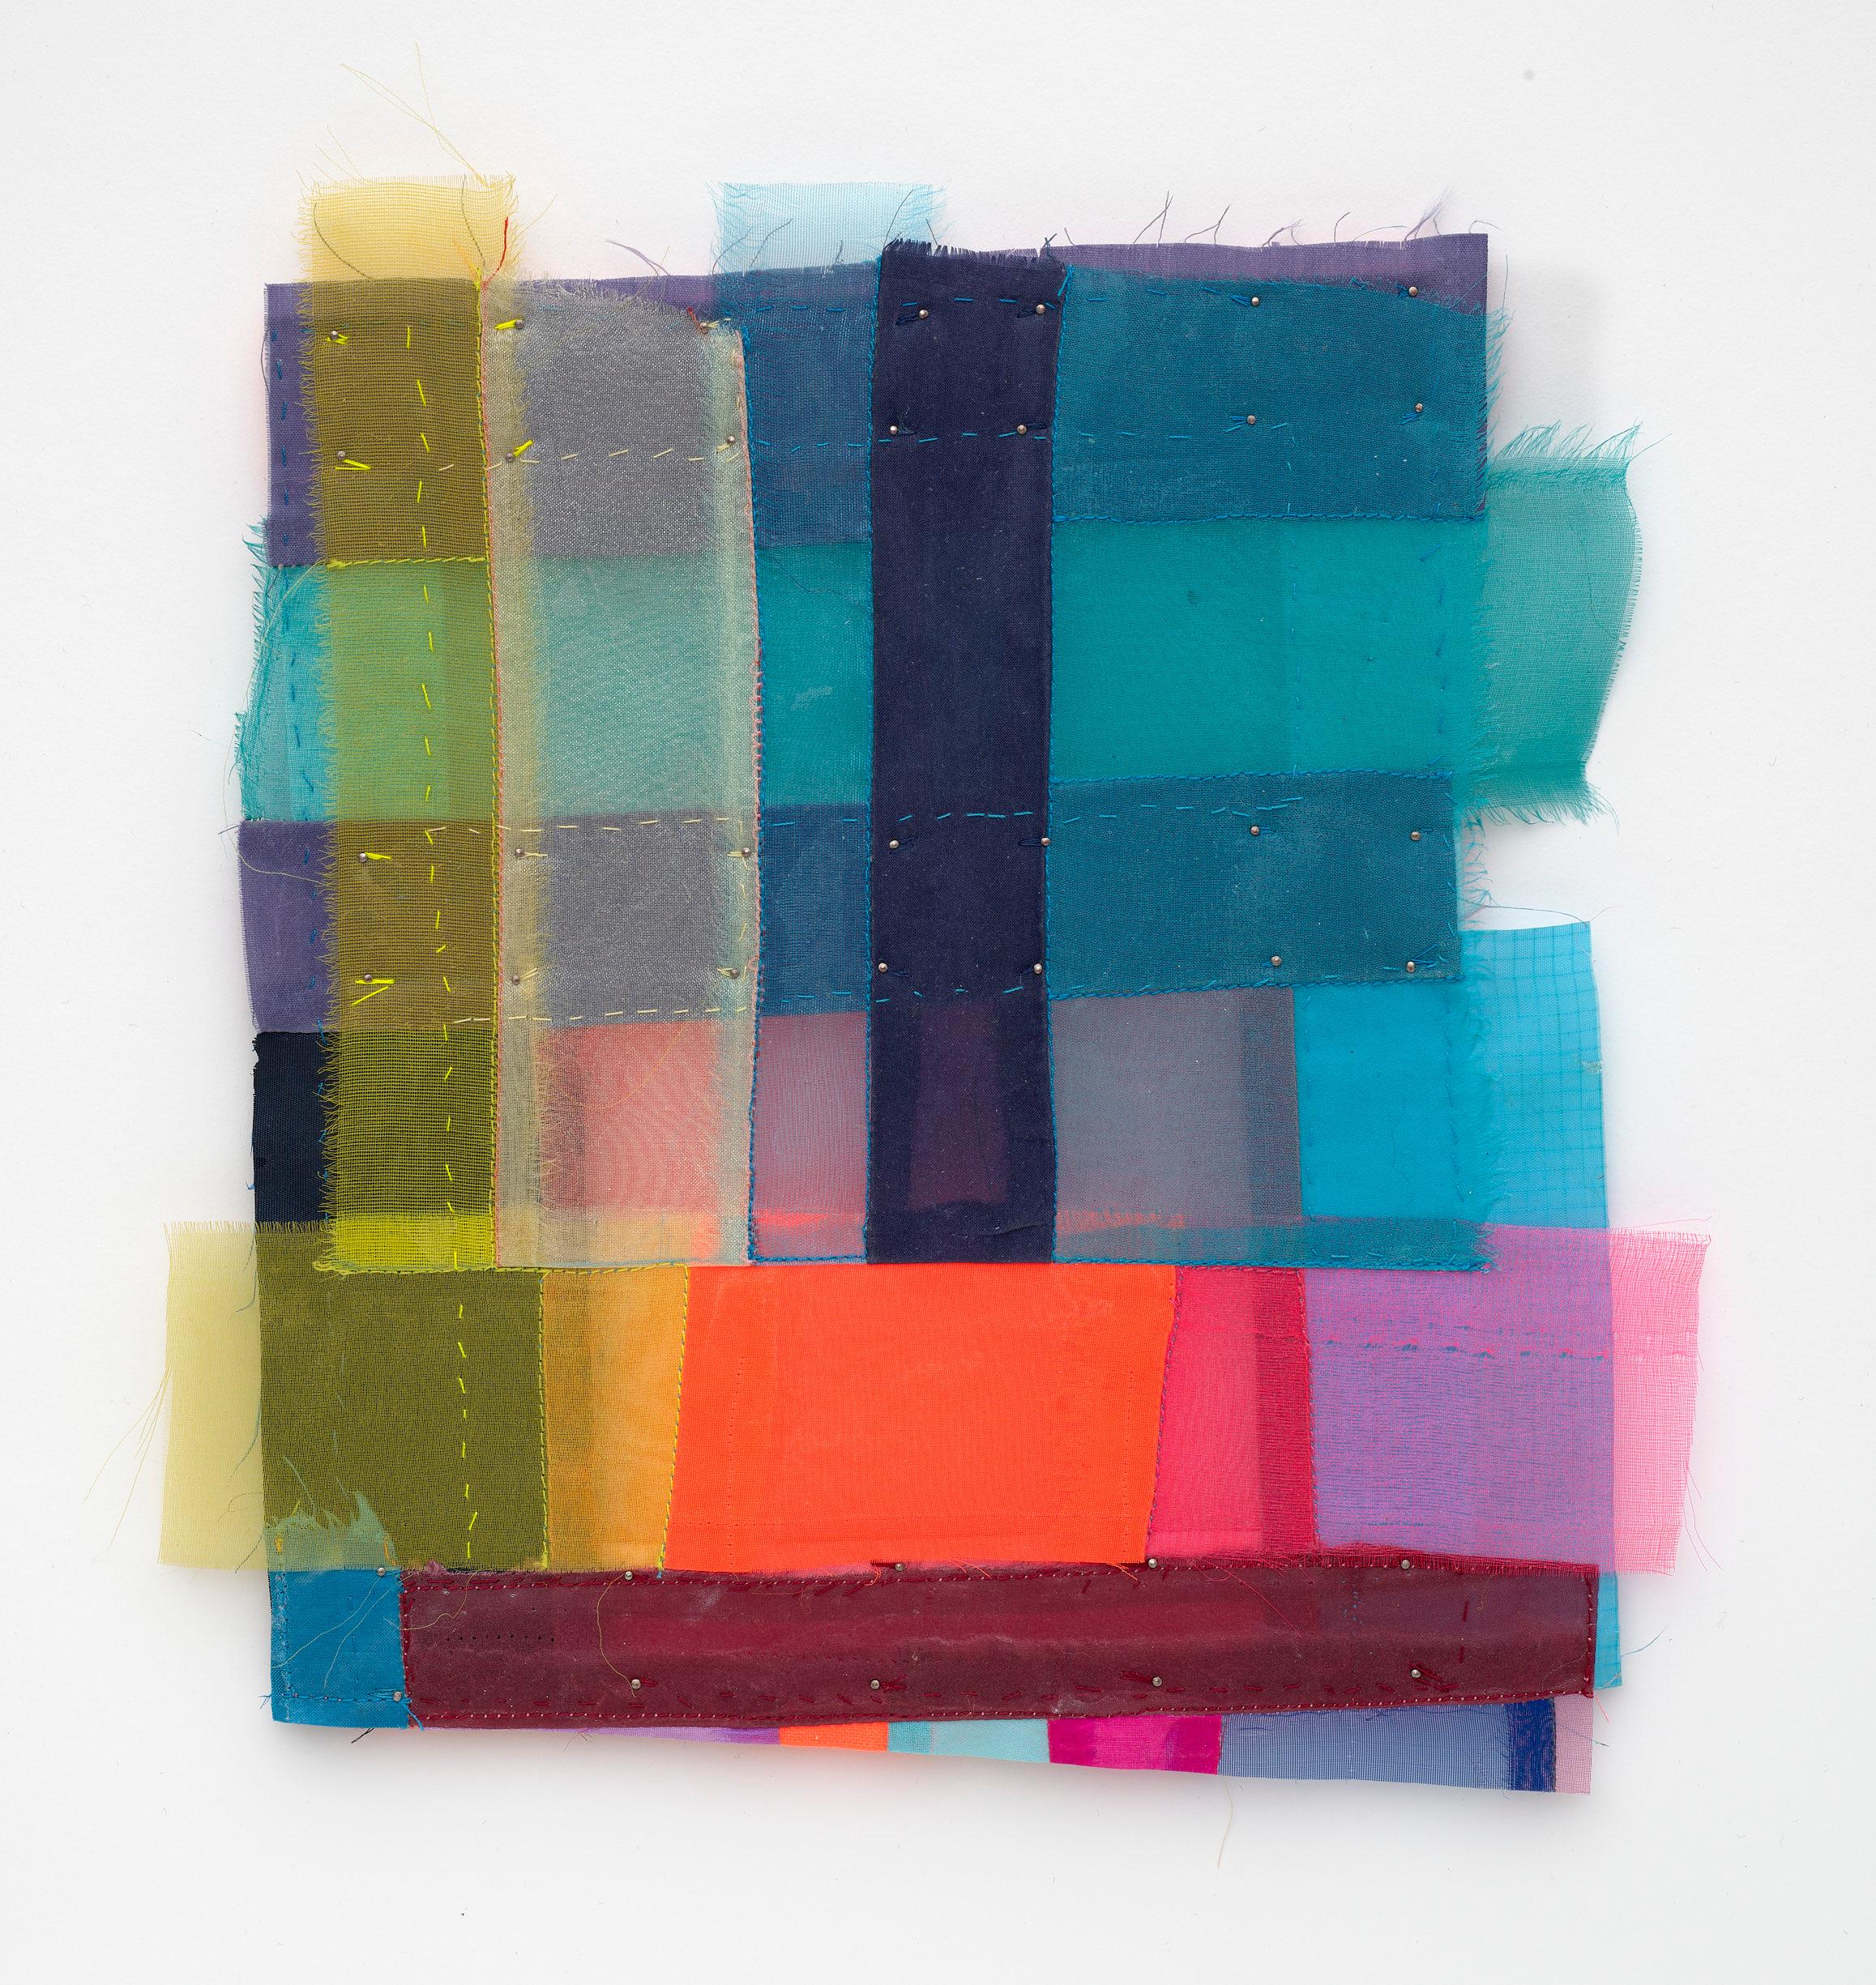 Plinth, 2023, vibrant, jewel-like, diaphanous strips of fabric collage